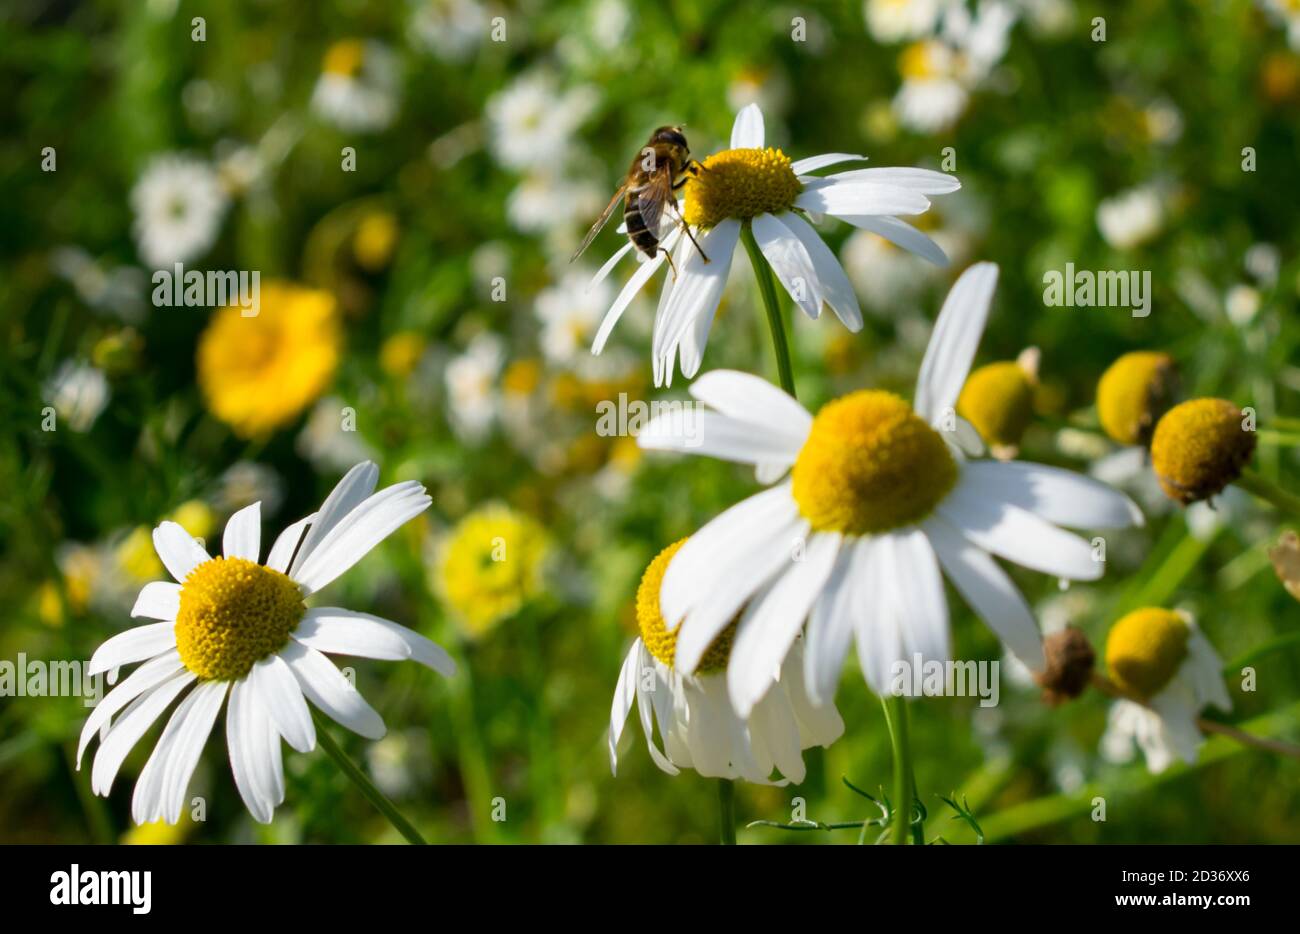 Bumble Bees In A Field of White and Yellow Flowers Stock Photo